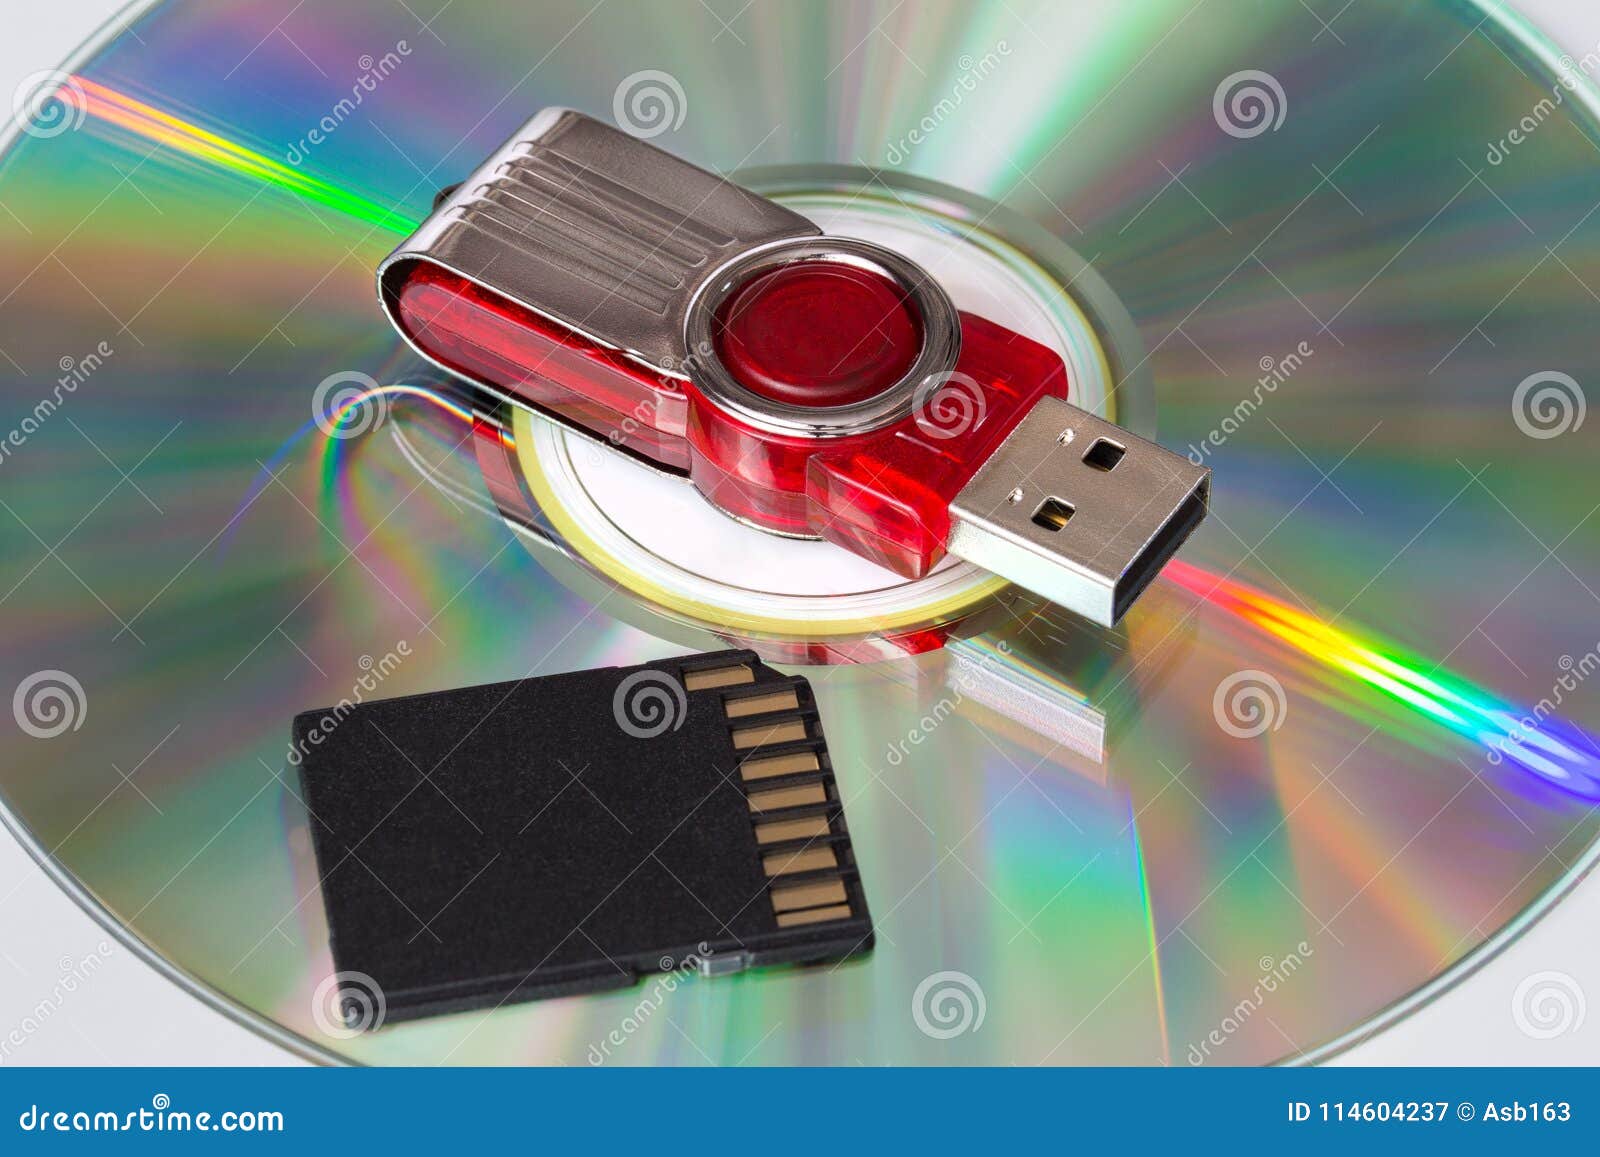 CD, Flash Drive and SD Card Stock Image - Image of accessory, memory